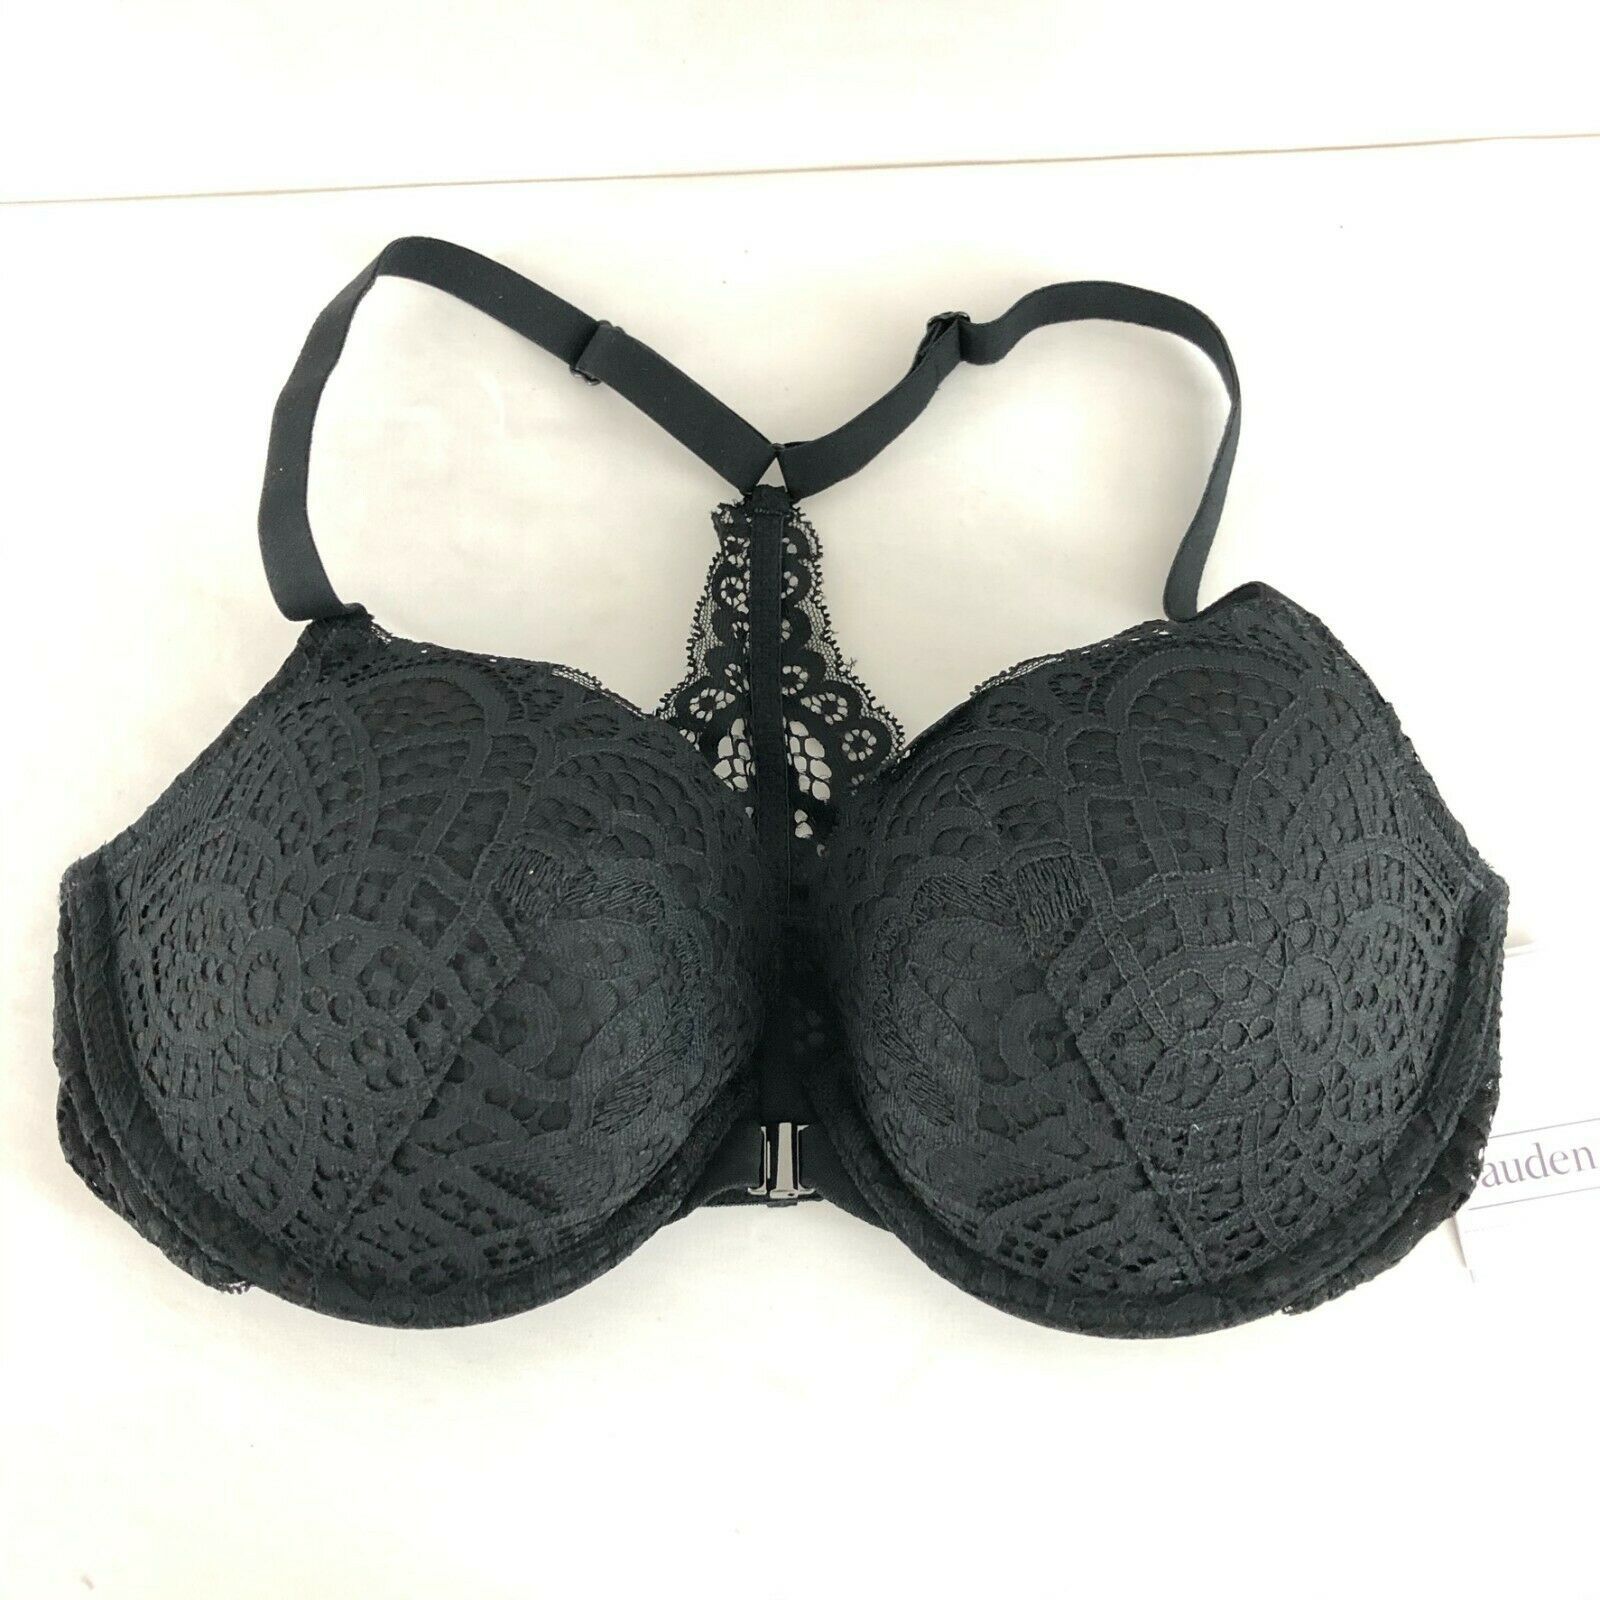 Primary image for Auden Bra The Radiant Plunge Push-Up Lace Front Closure Lace Overlay Black 32D